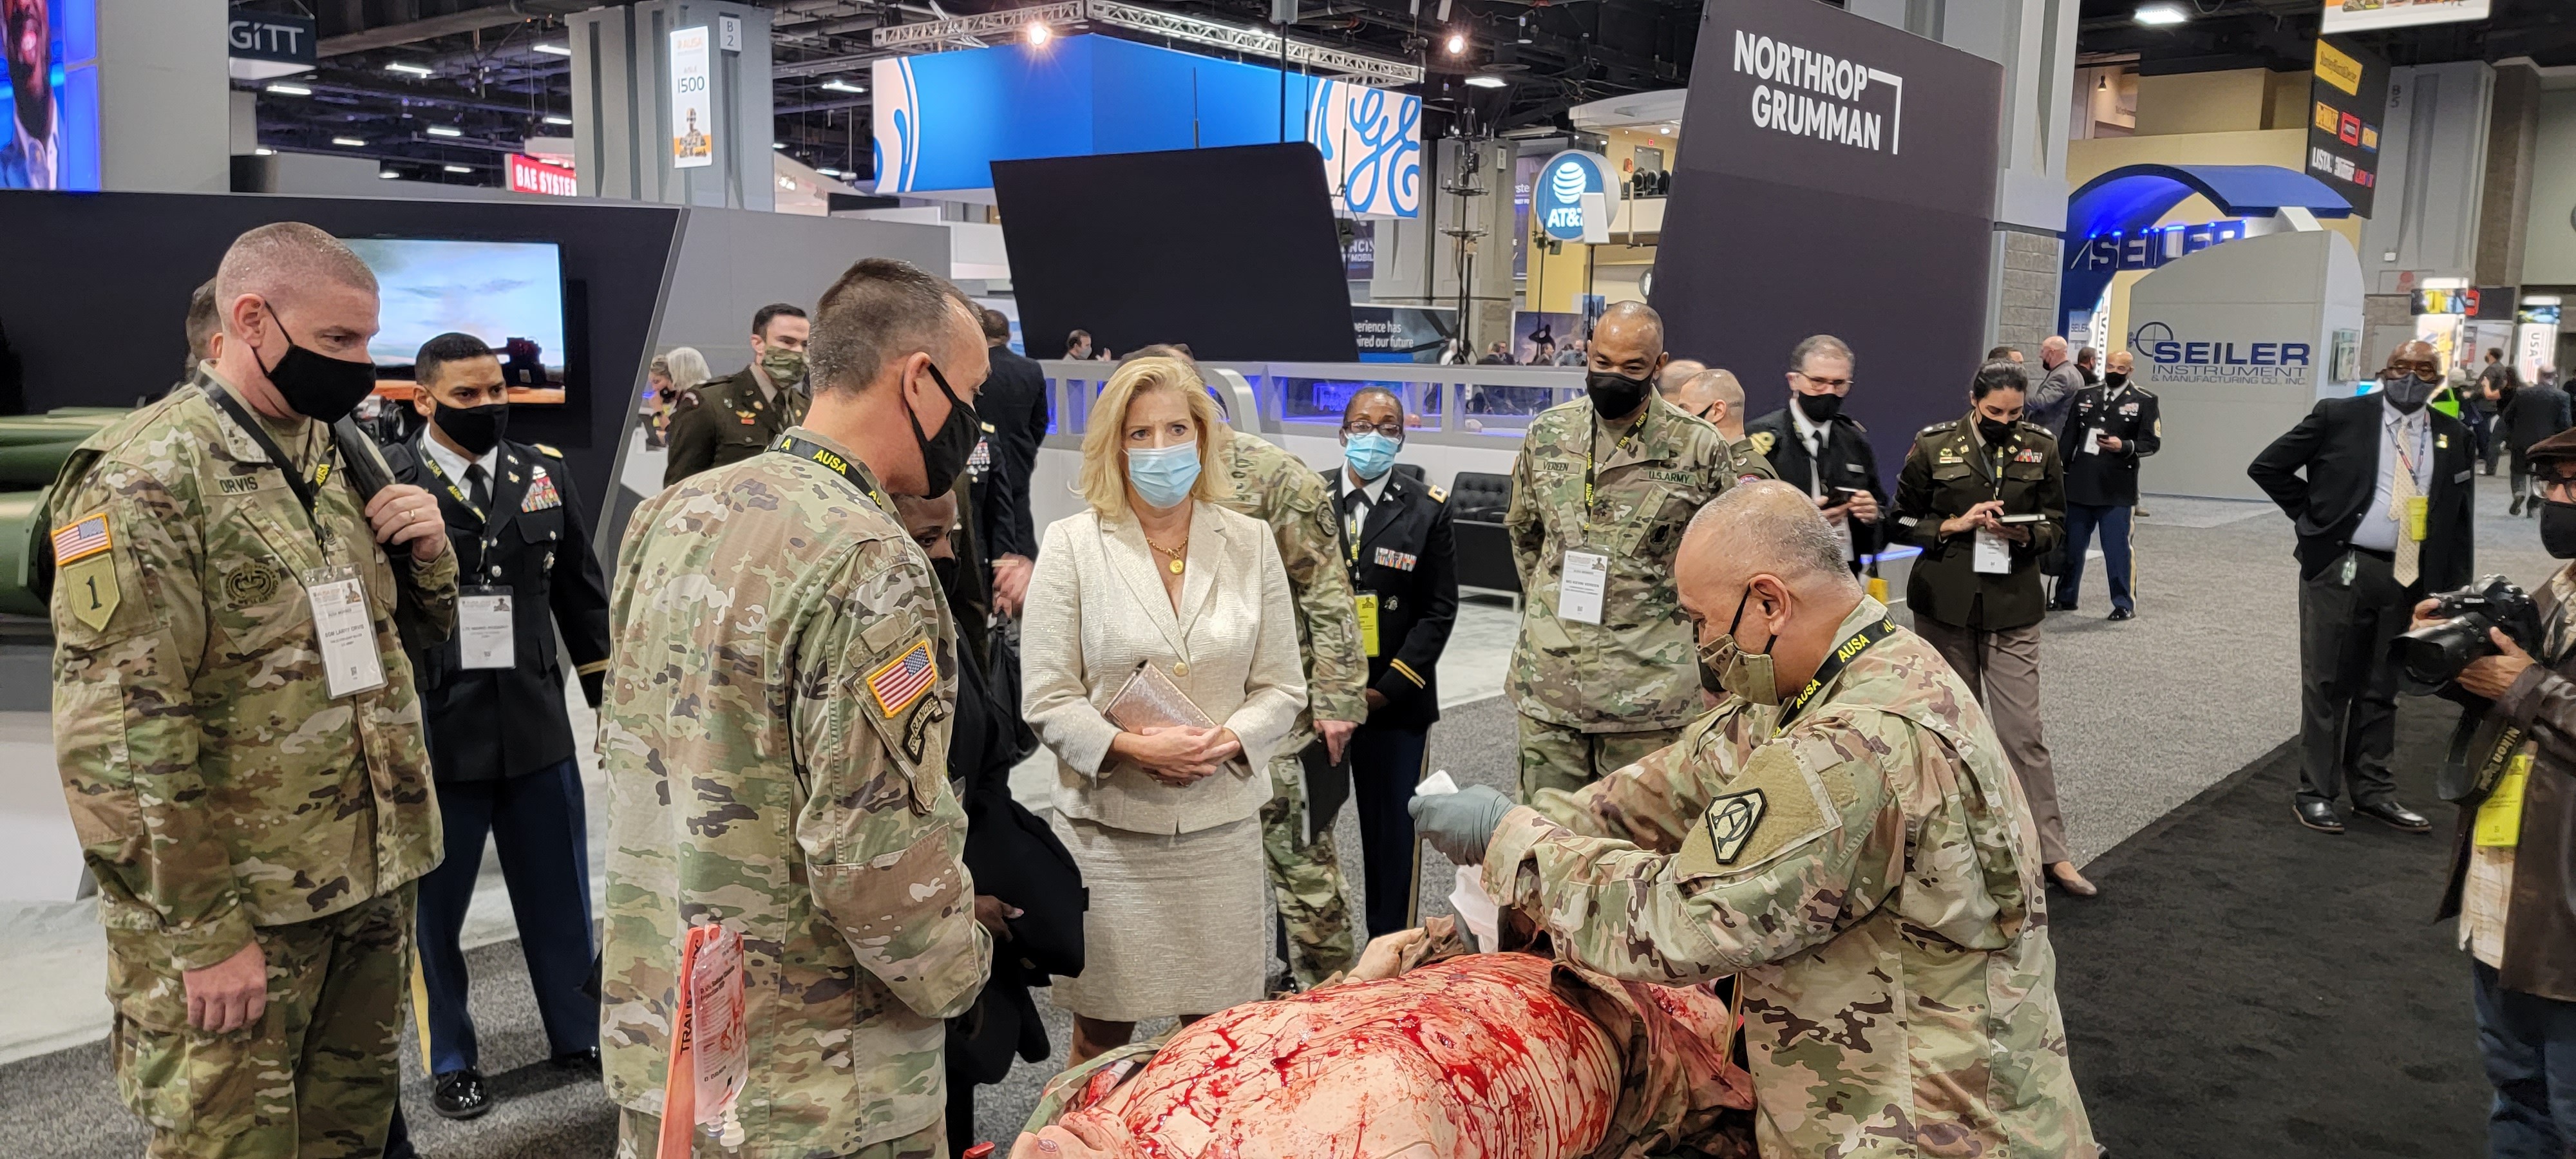 MEDCoE hosts popular, interactive display at the 2021 AUSA Annual